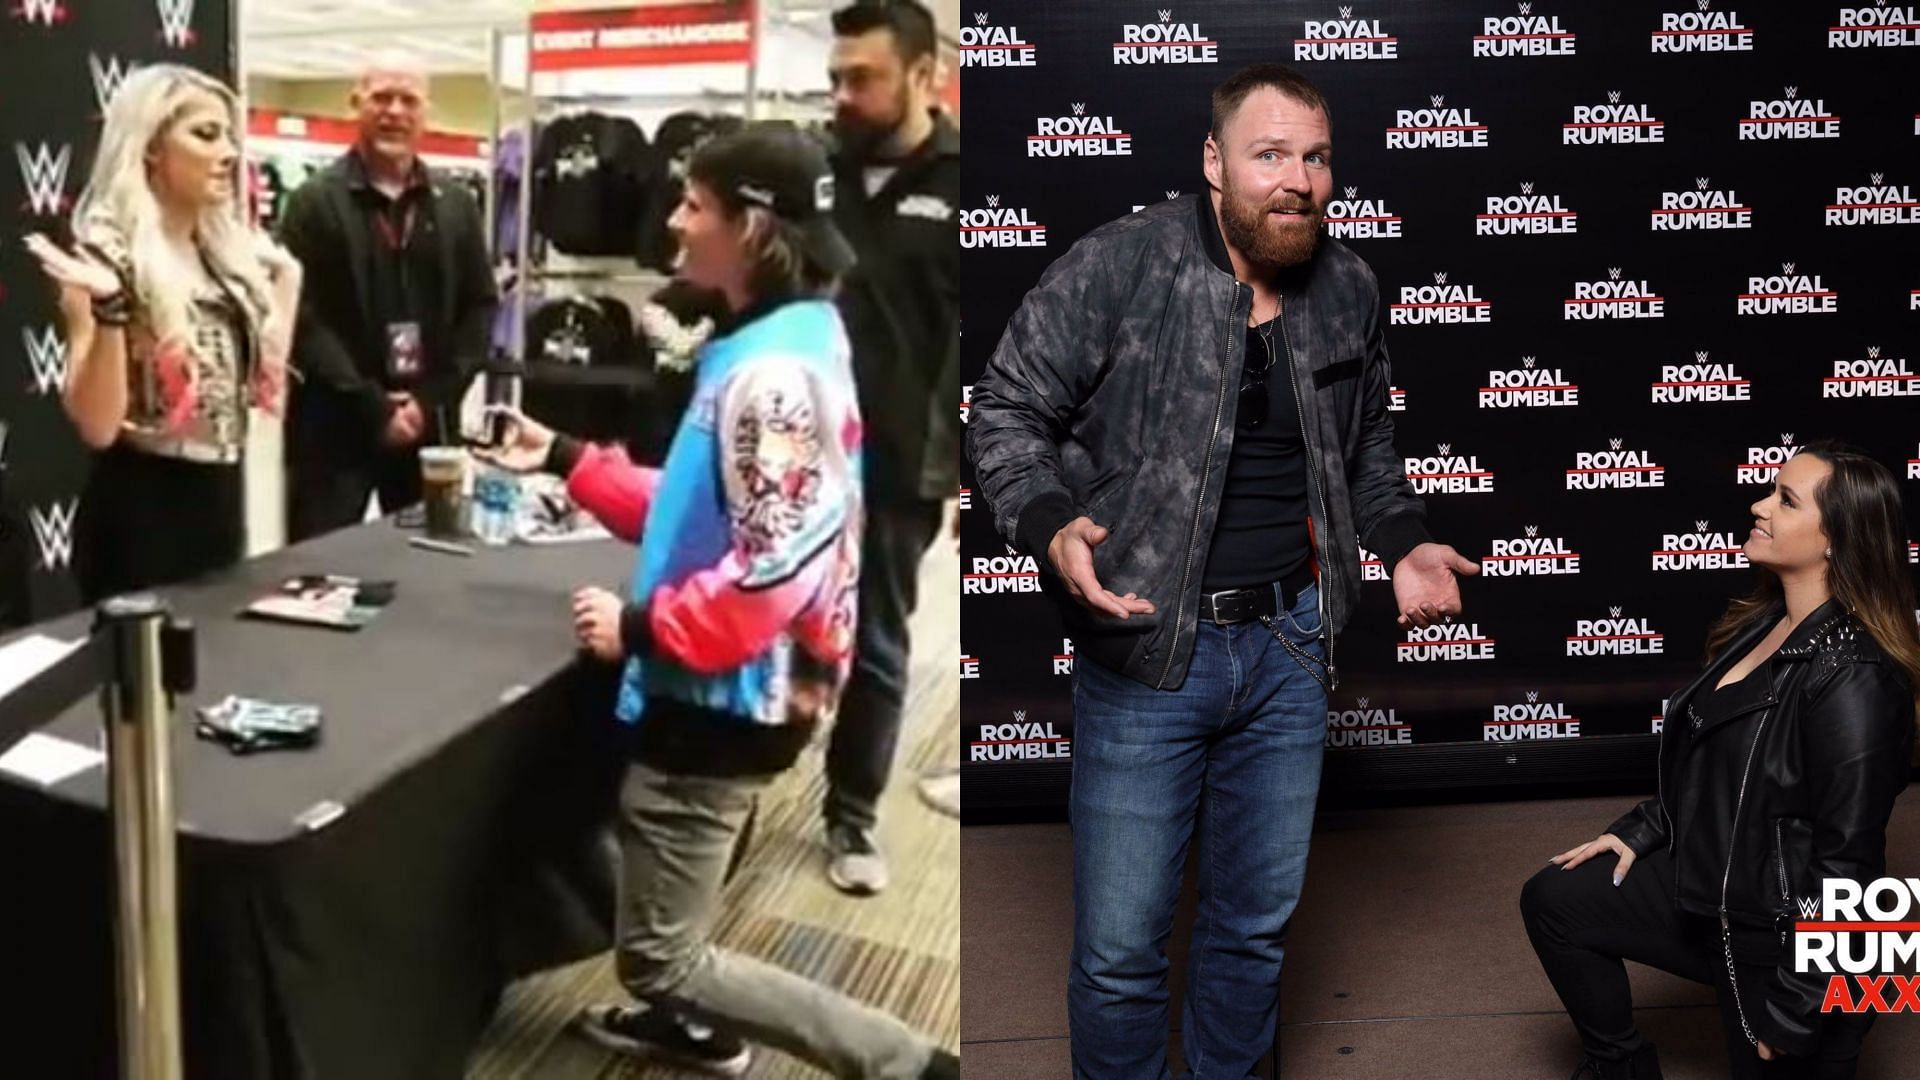 Alexa Bliss with a fan (left) and Jon Moxley (fka Dean Ambrose) with a fan (right)